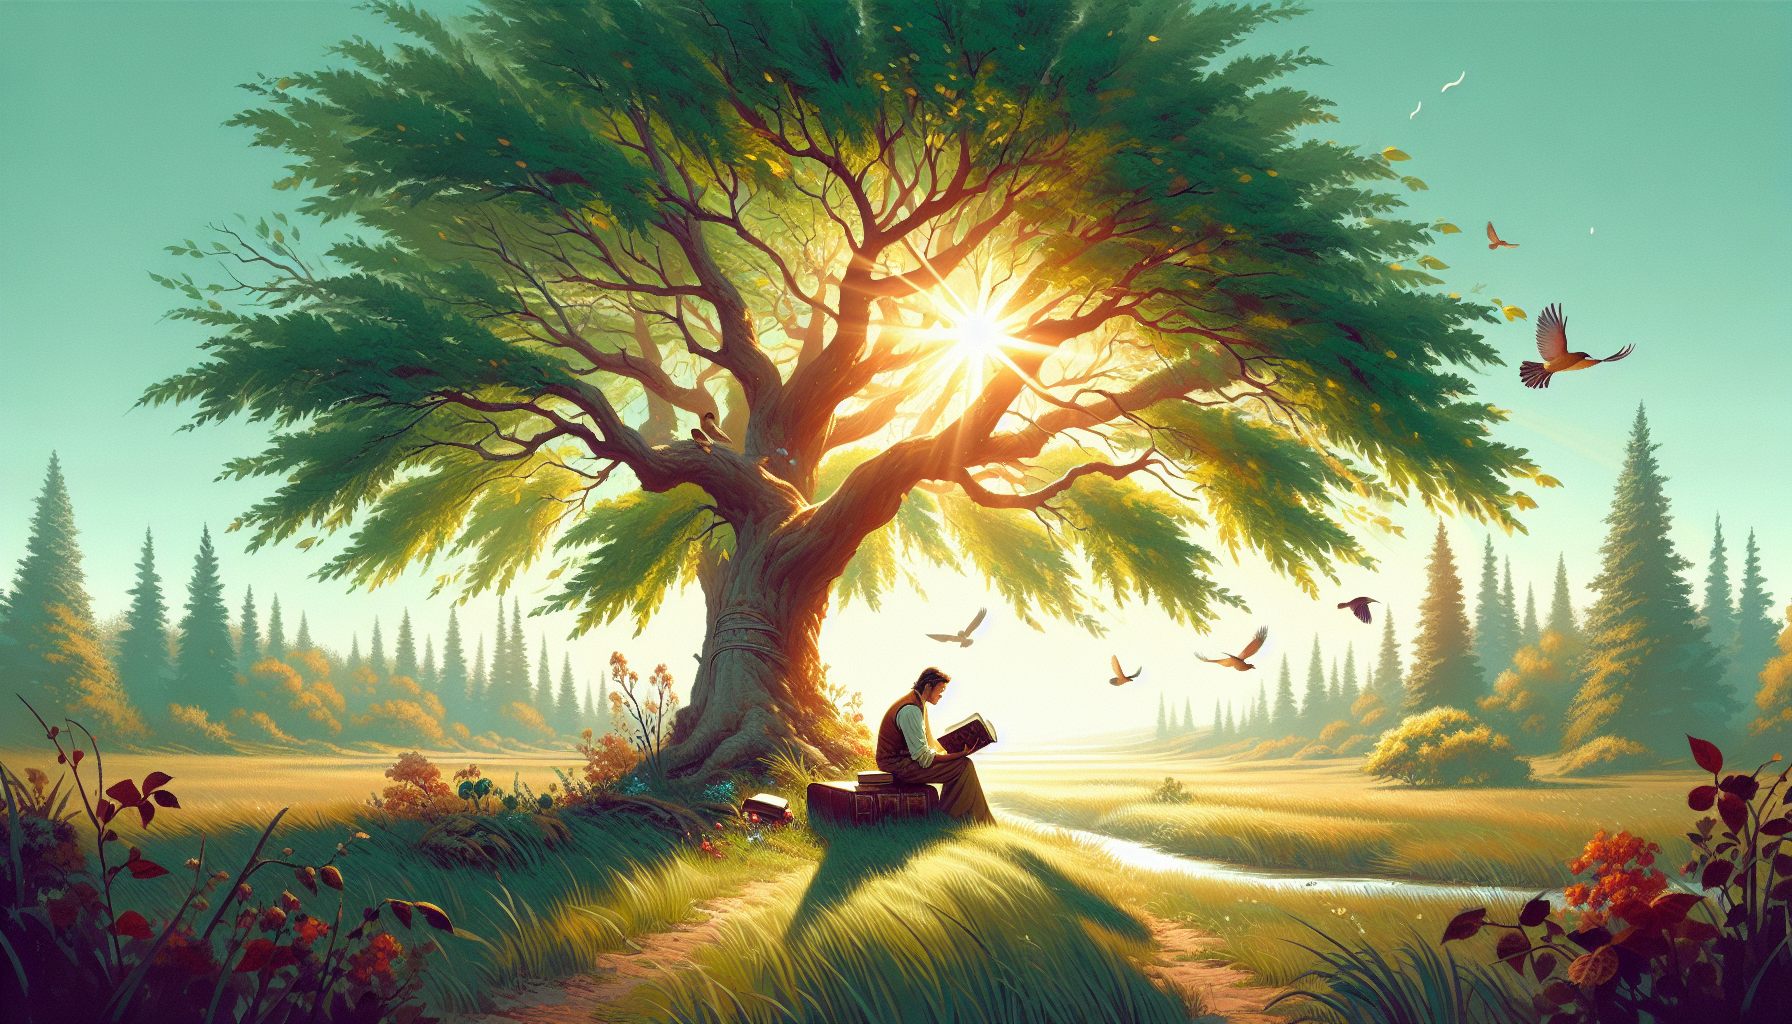 Serene landscape depicting a person sitting under a large, flourishing tree on a sunny day, reading a worn leather-bound Bible, with soft light filtering through the leaves and birds perched singing n